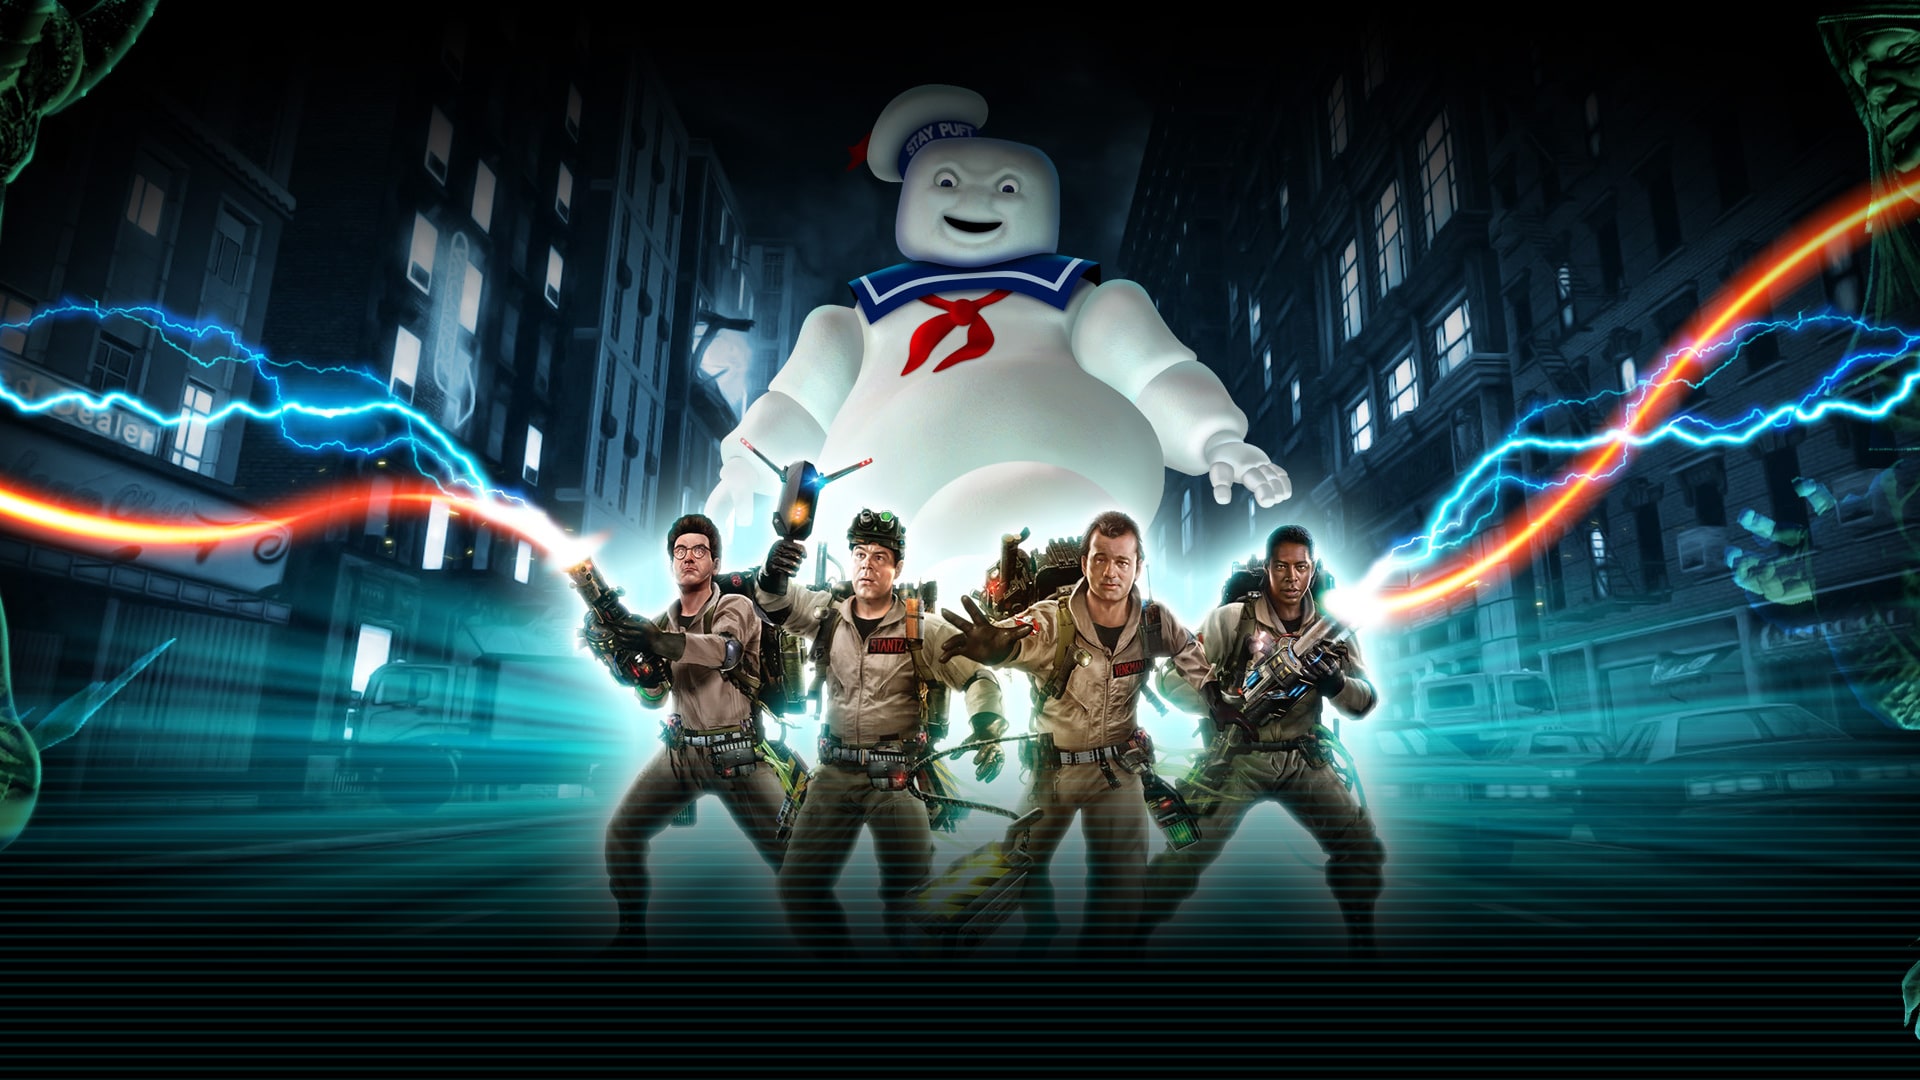 Afterlife Desktop Wallpaper Ghostbusters The Video Game